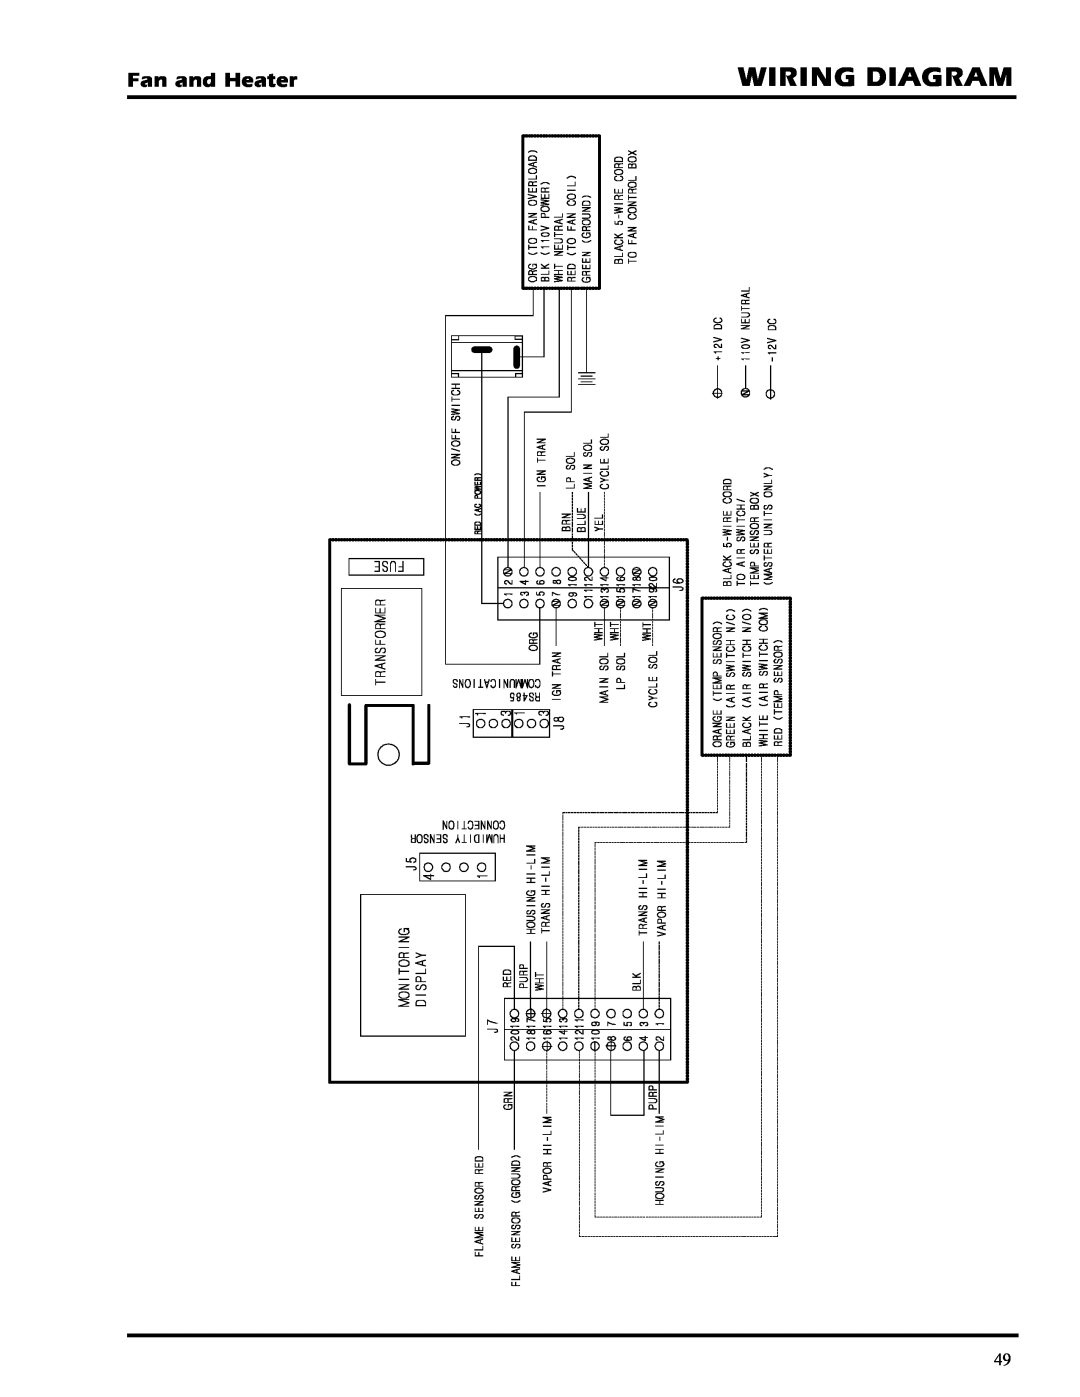 GSI Outdoors PNEG-377 service manual Wiring Diagram, Fan and Heater 